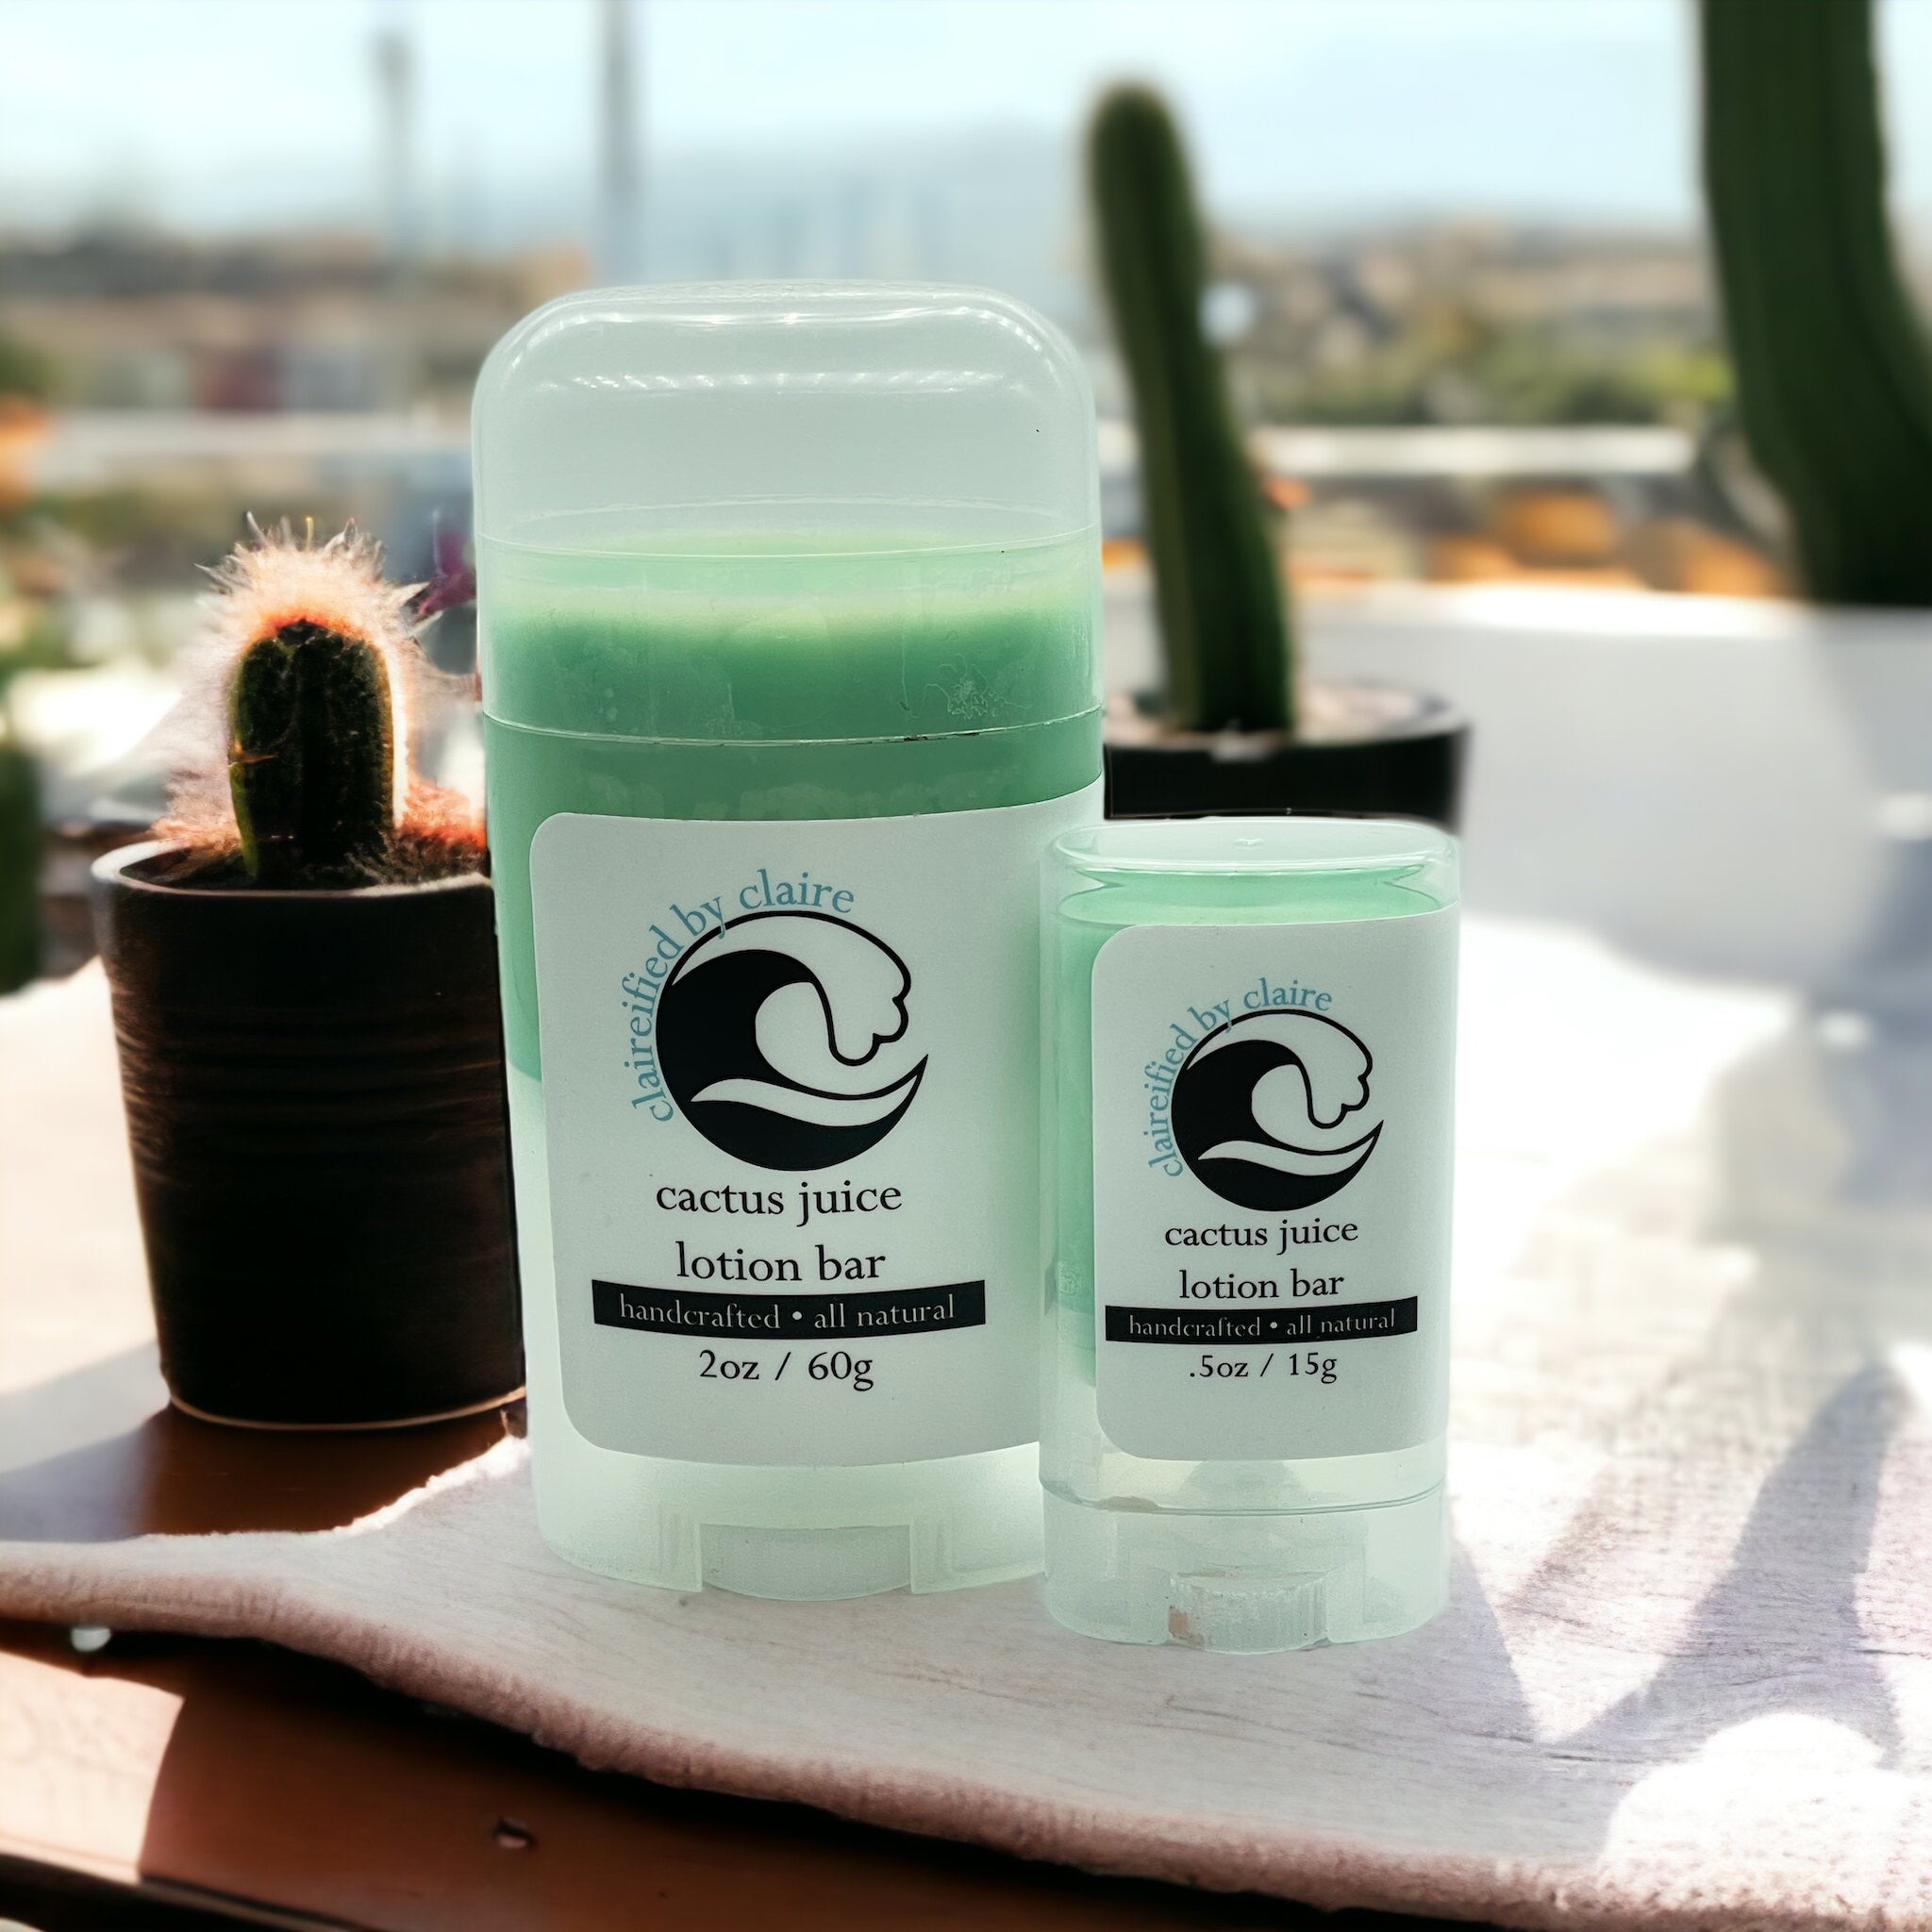 Cactus Juice - Avatar the Last Air Bender Inspired Lotion Bar